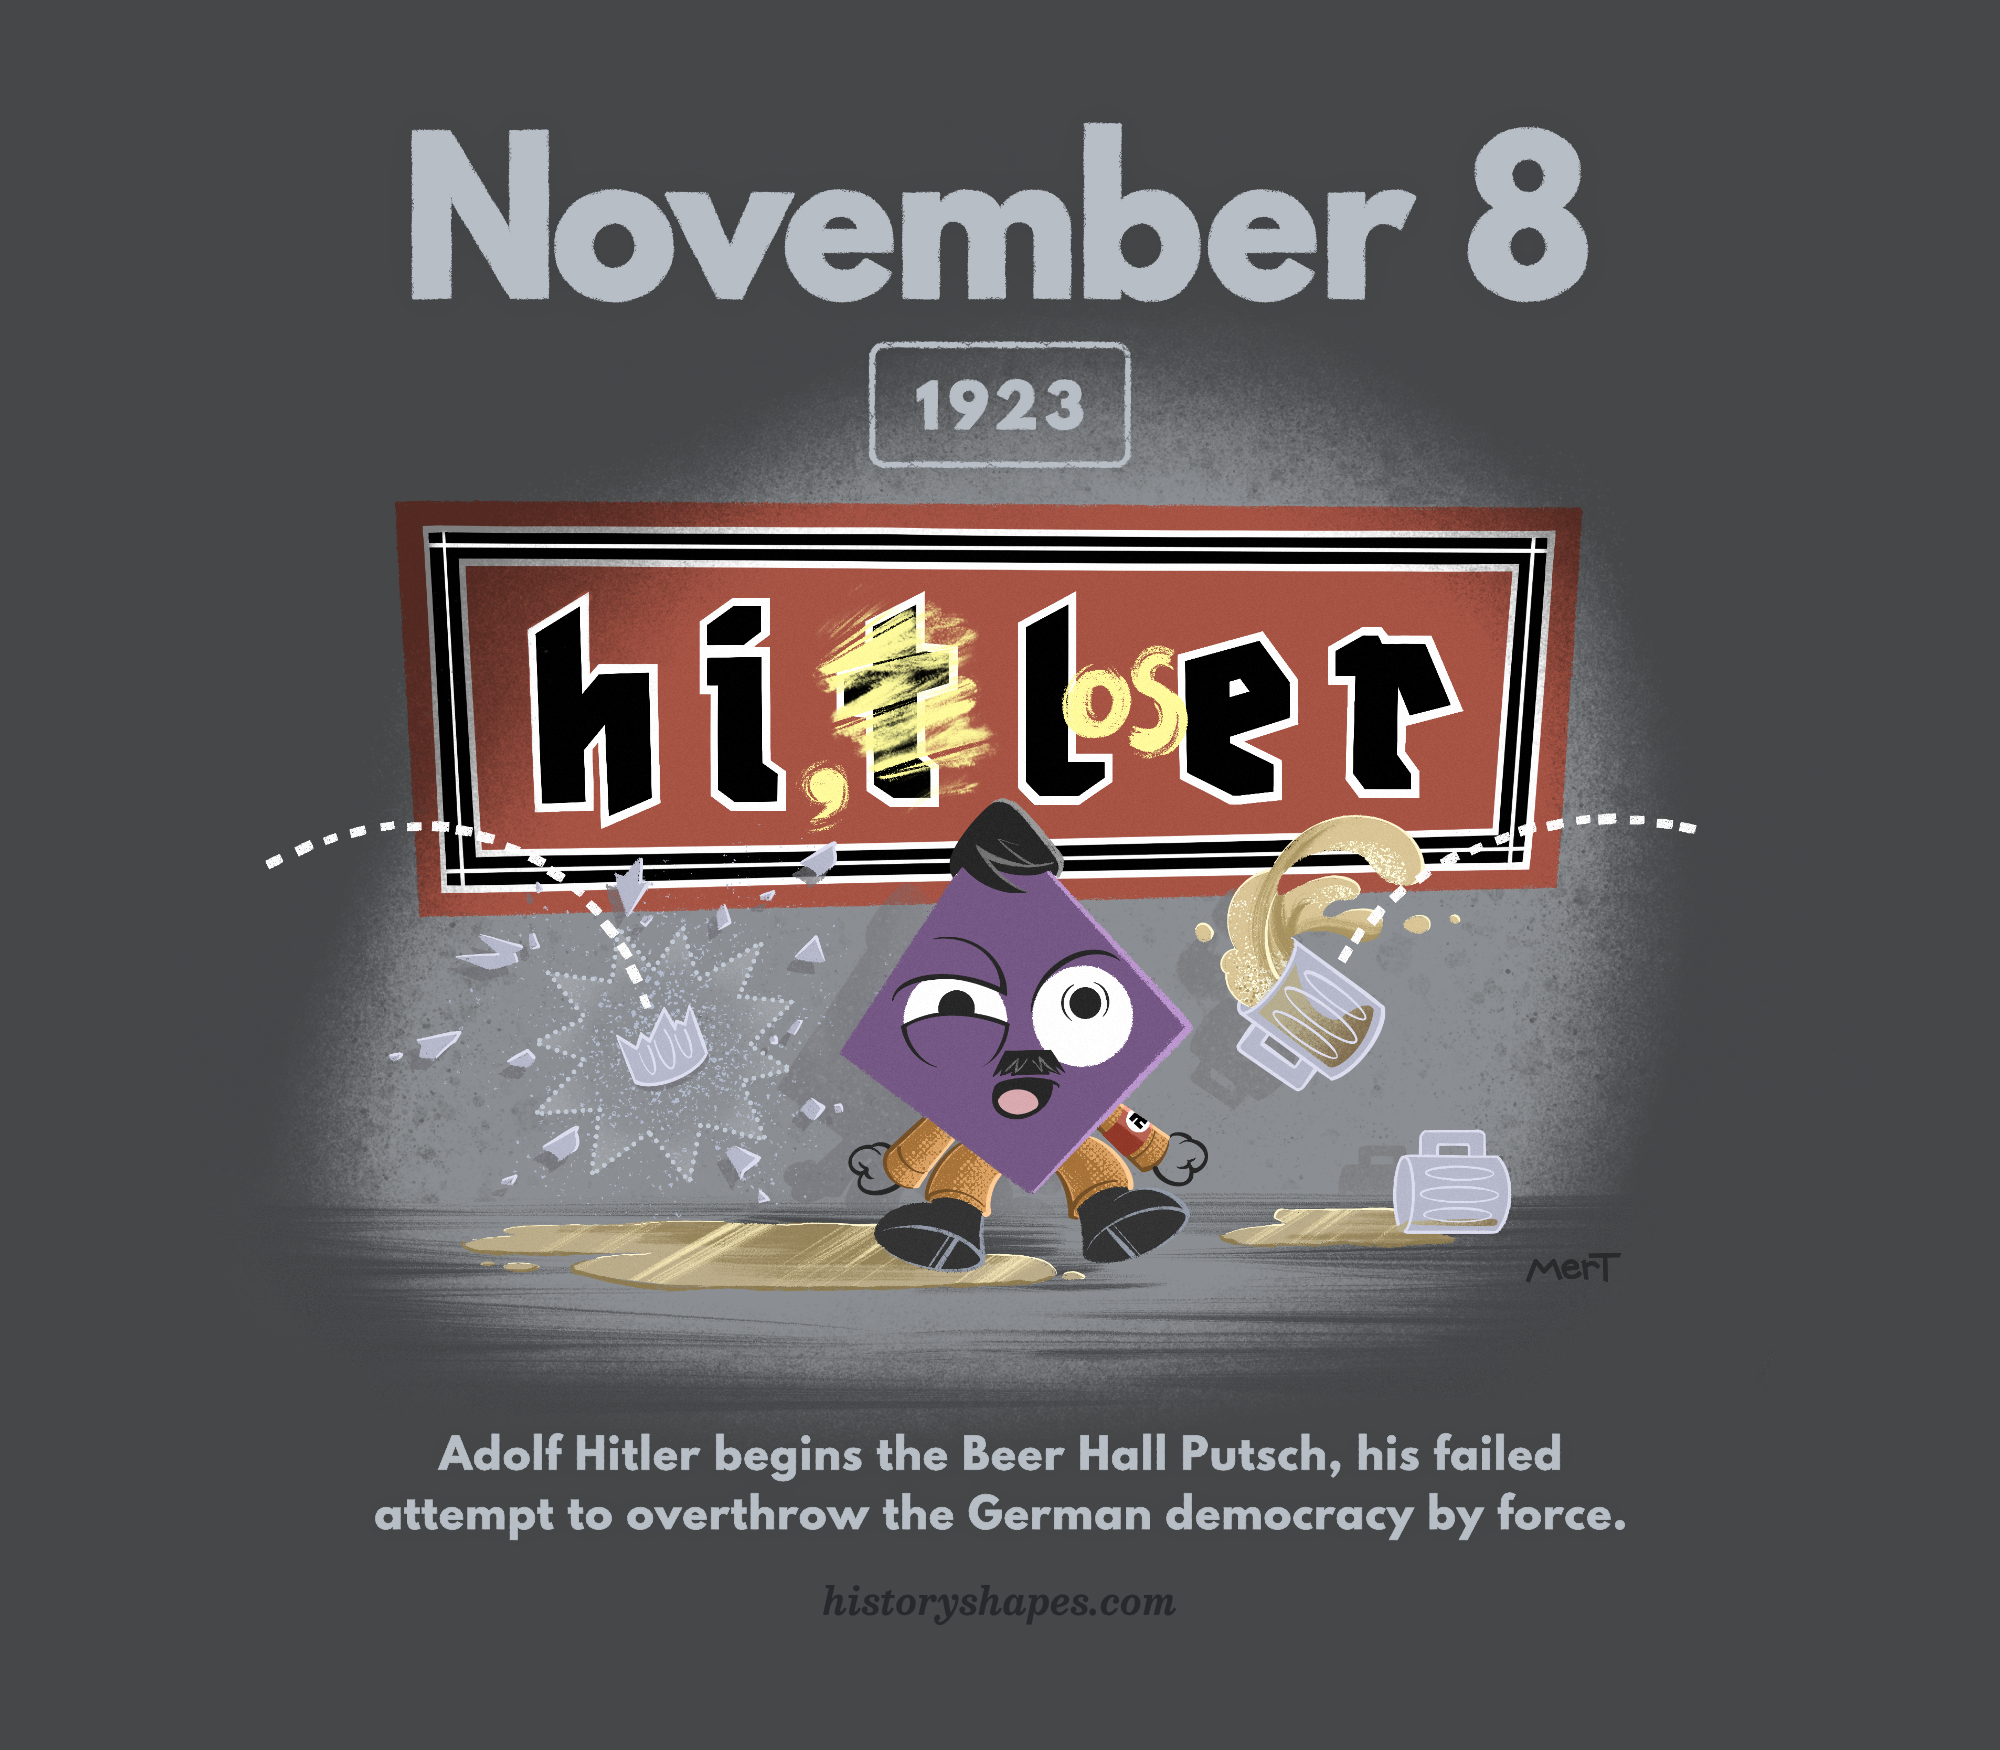 Dom, a crazed purple diamond, is dressed as Adolf Hitler freaking out. Beer mugs are thrown at him, and a HITLER banner is defaced to say "HI LOSER" 